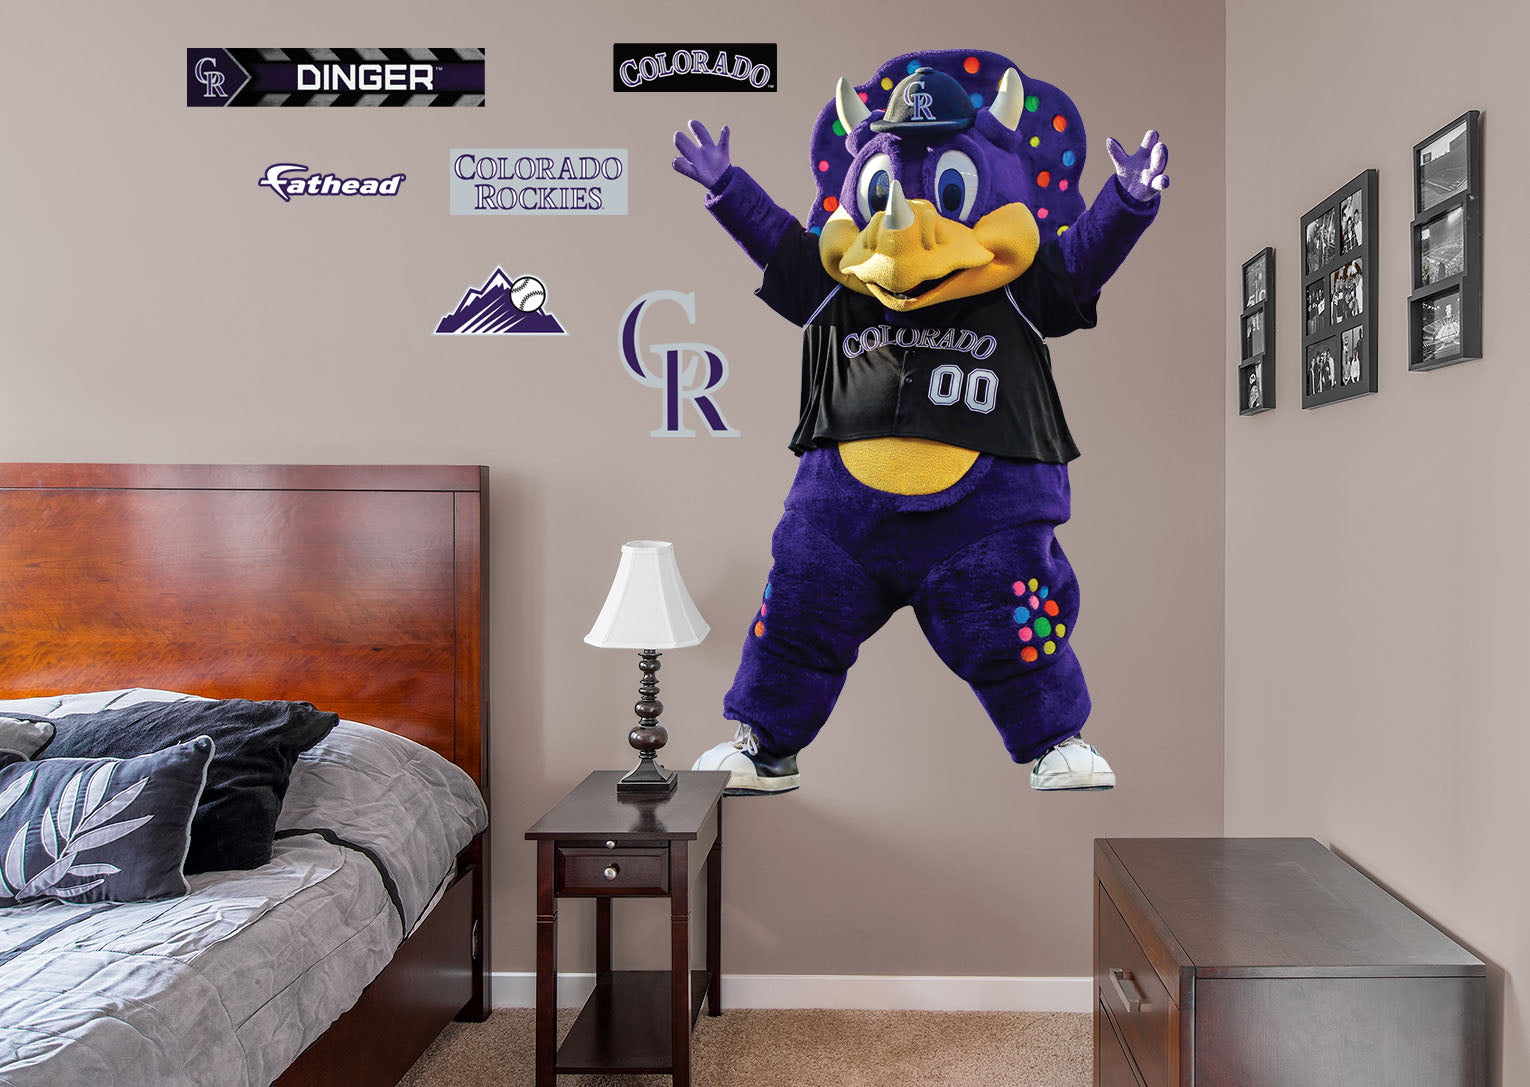 Colorado Rockies: Dinger 2021 Mascot - Officially Licensed MLB Removable  Wall Adhesive Decal